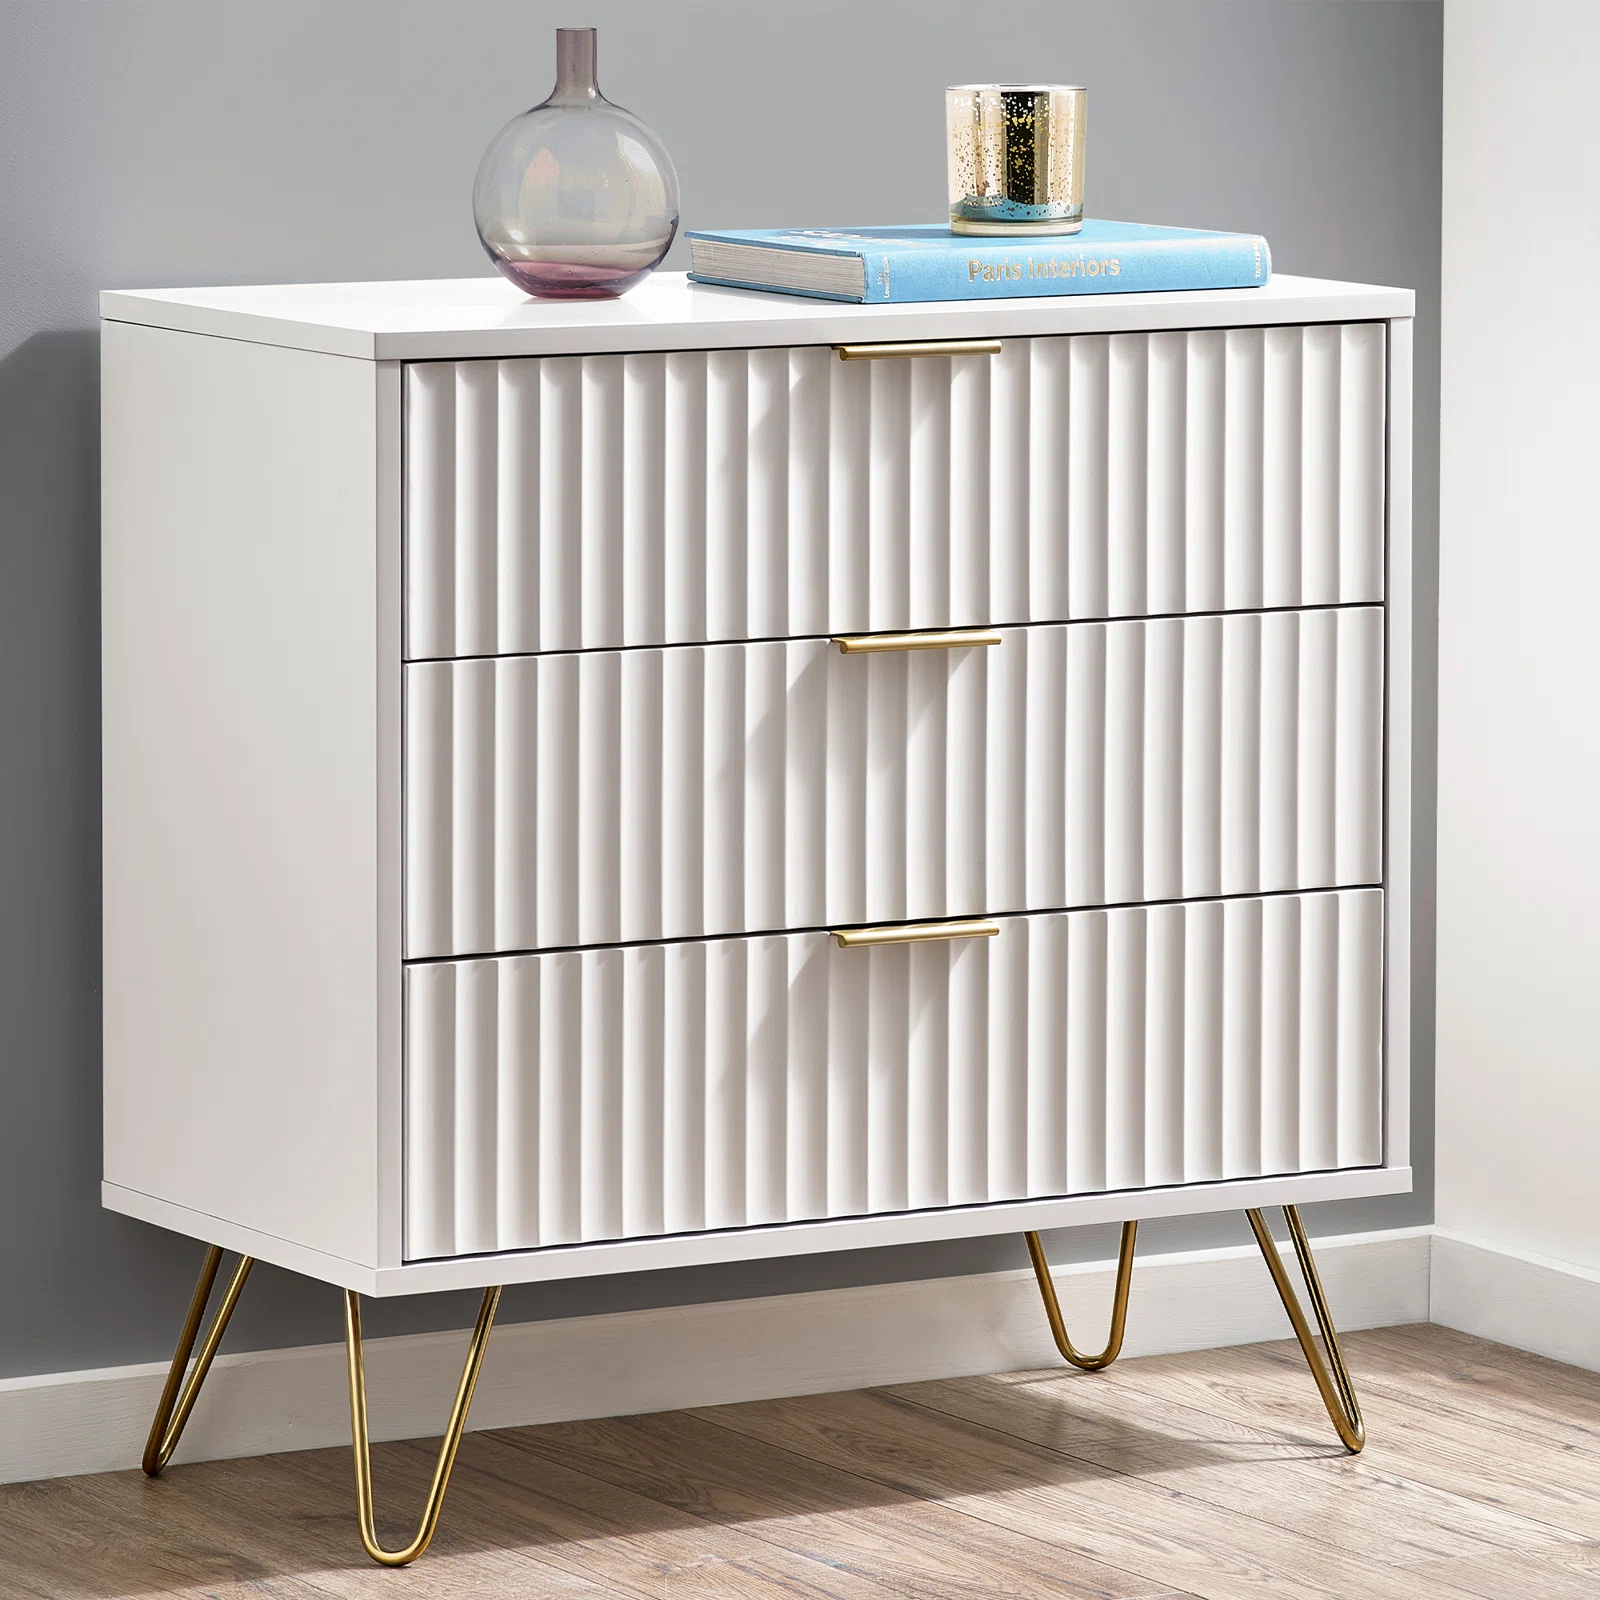 Contemporary Style Smooth Finish Bedroom Furniture 3 Drawer Chest